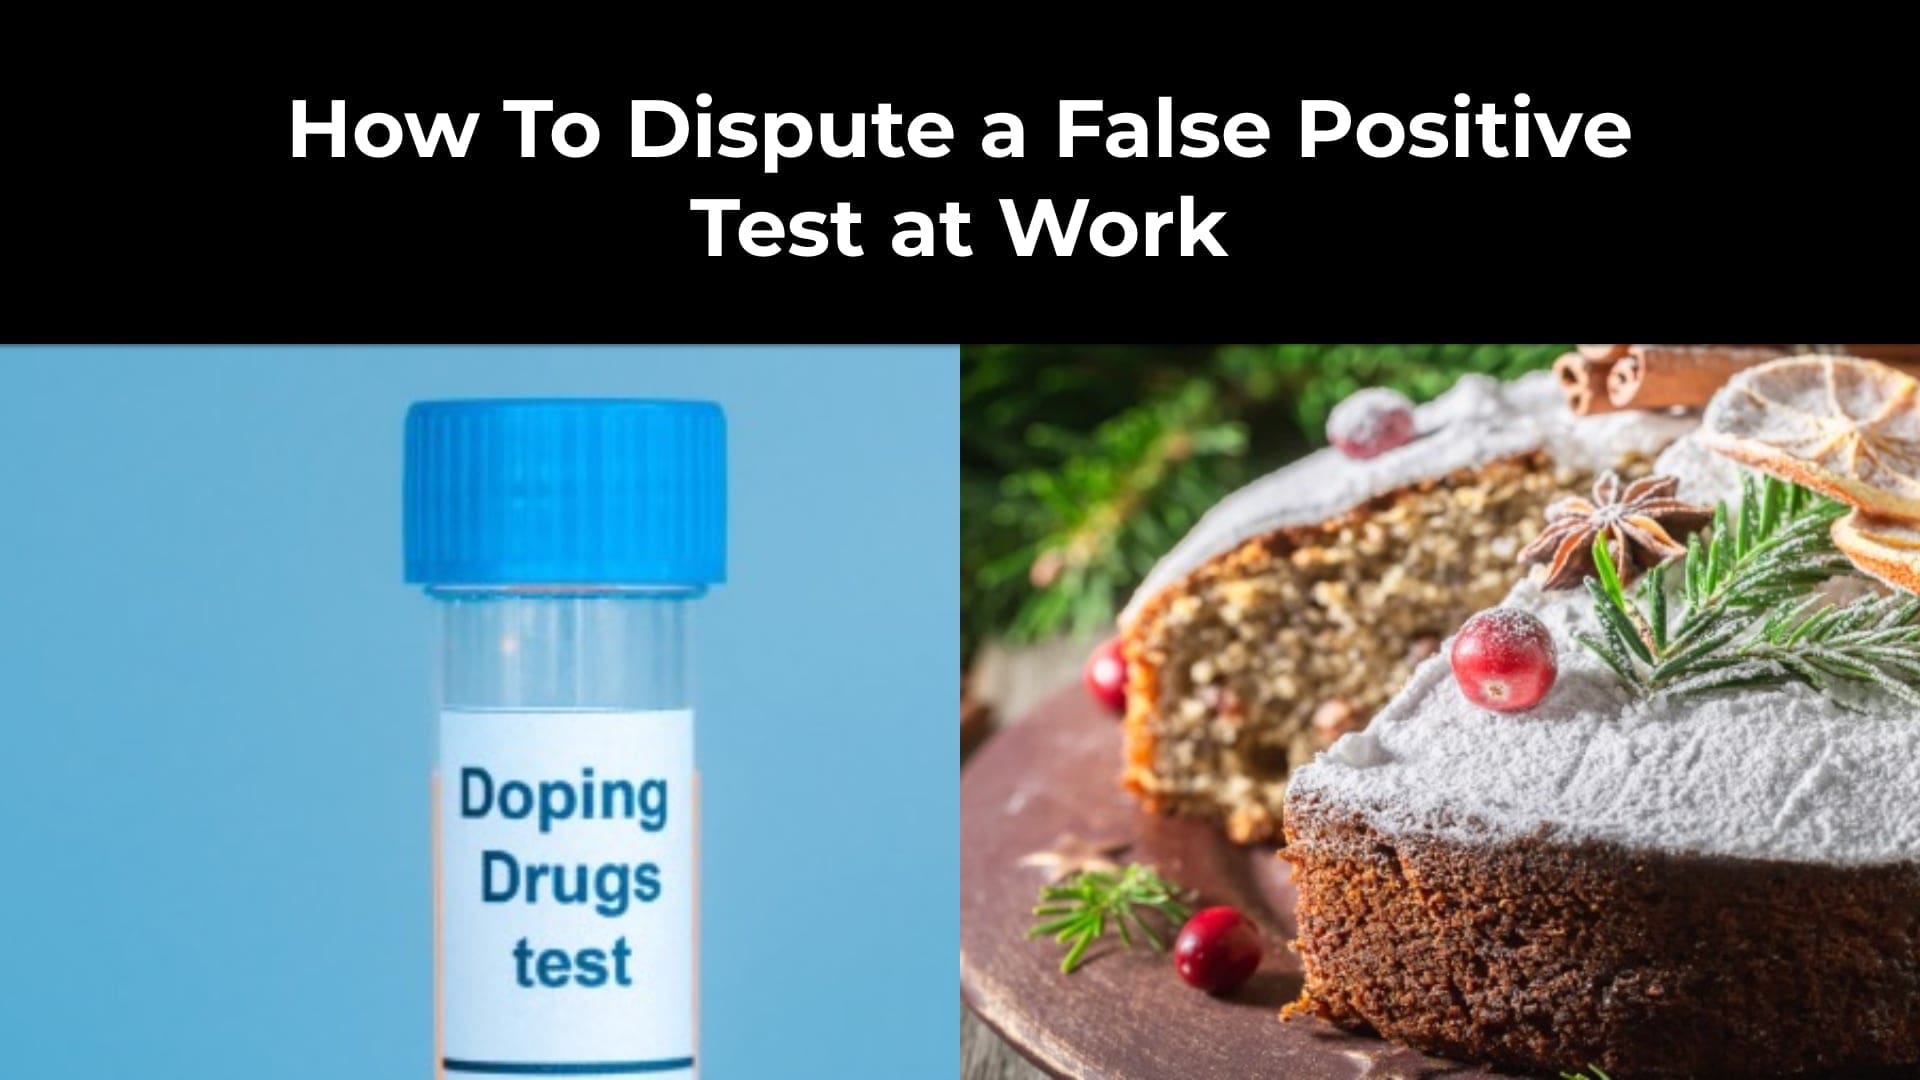 How To Dispute a False Positive Test at Work